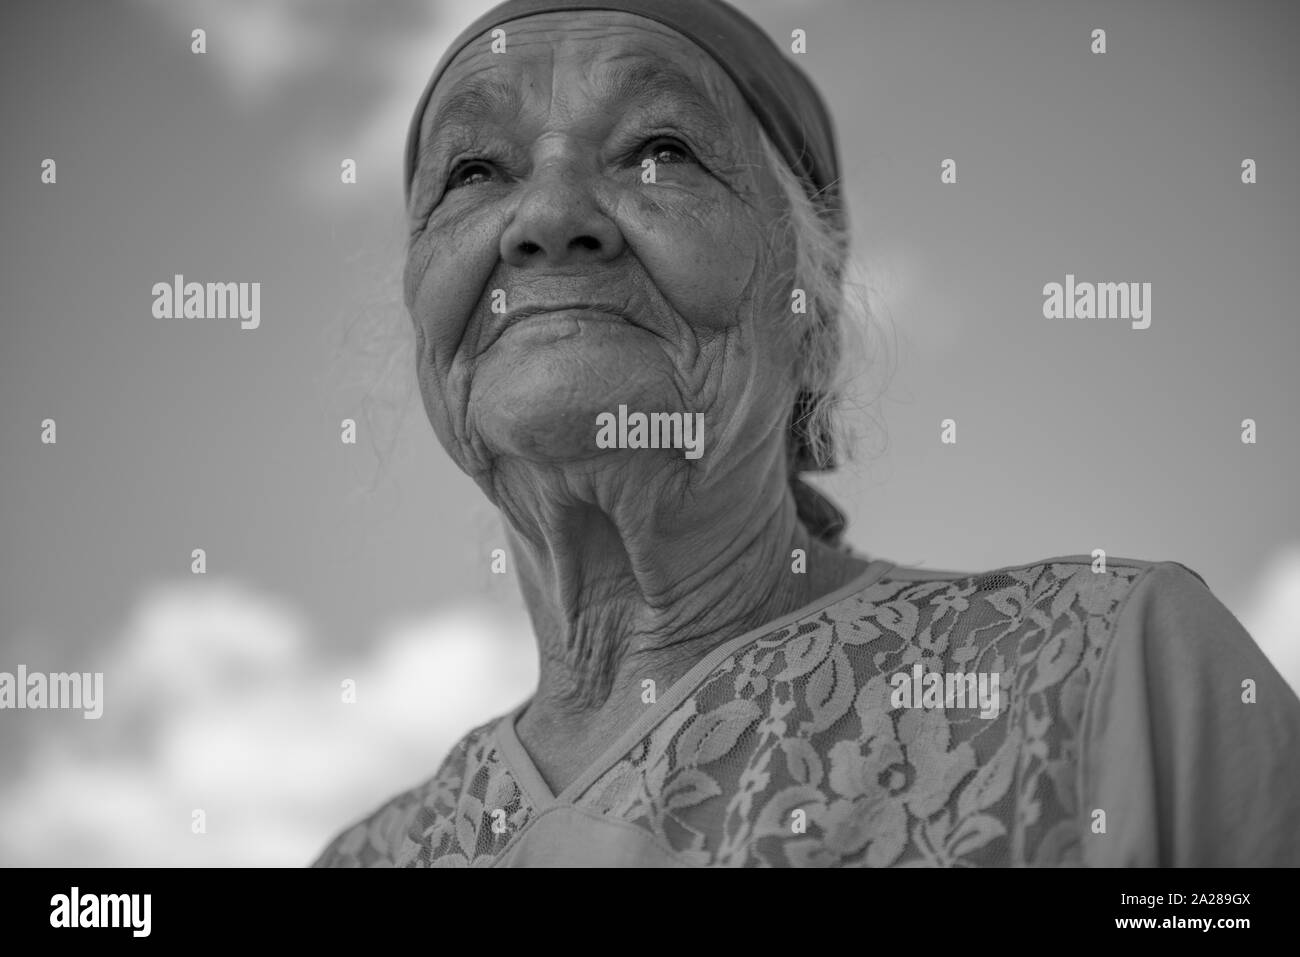 Senior woman from Caruaru, looking away Stock Photo